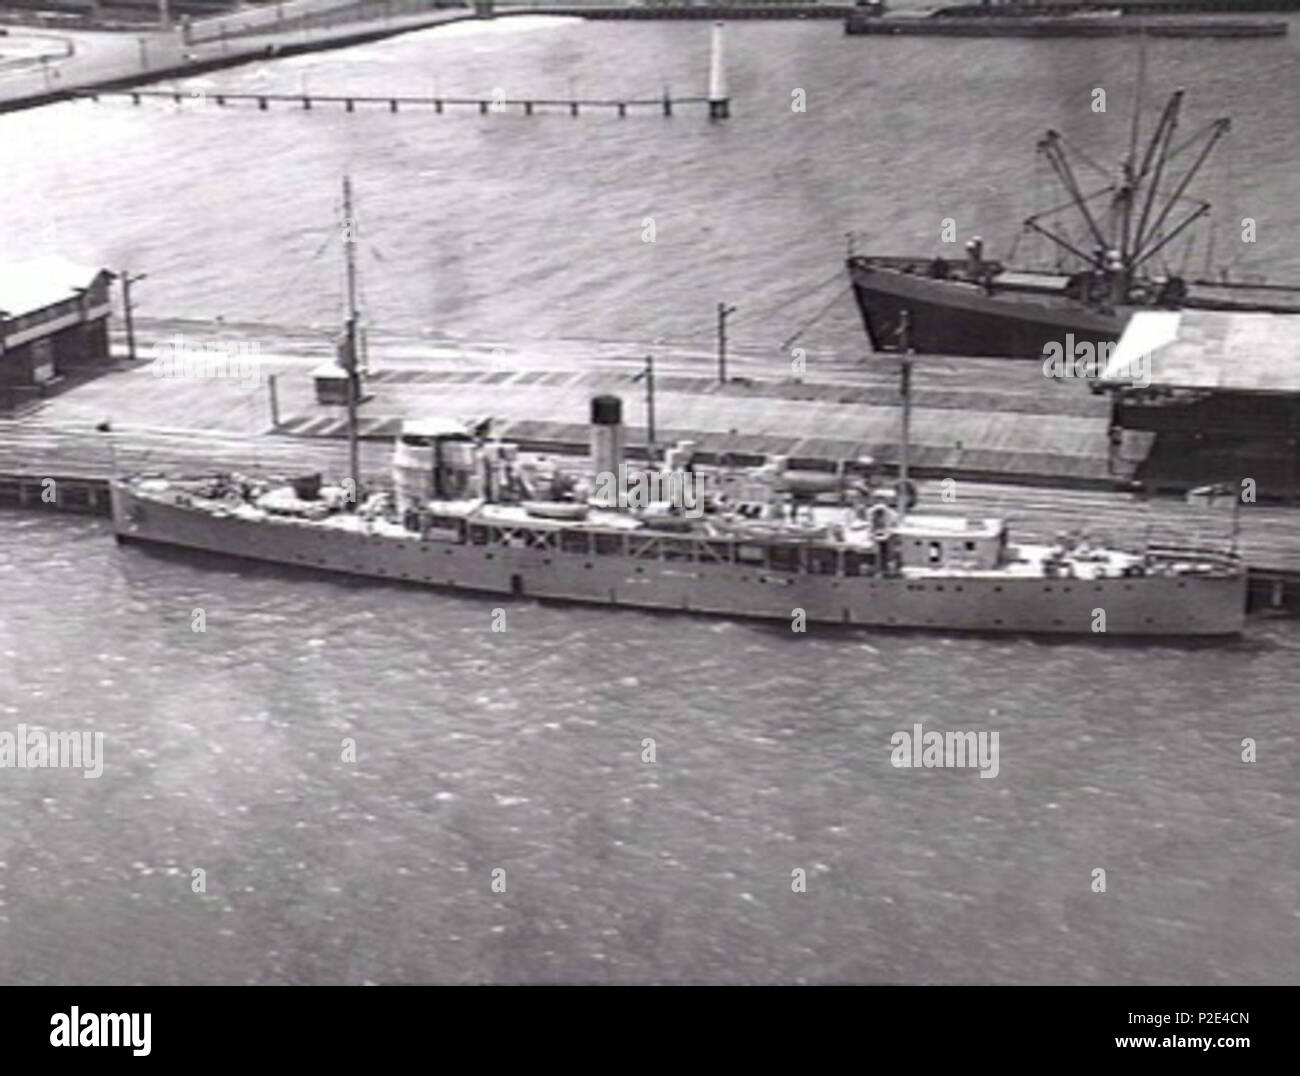 . English: AWM caption: Port Melbourne, VIC. 1940-02-01. Aerieal port side view of the former Royal Navy convoy sloop and RAN survey vessel HMSA Moresby (I) (ex HMS Silvio) during her first period of World War 2 service as an auxiliary anti-submarine vessel (1939–1940). She is armed with a 4 inch gun forward and depth charge rails and throwers aft. Note the protective p[lating around the forward superstructure. (Naval Historical Collection) . 1 February 1942. Unknown 25 HMAS Moresby 301056 Stock Photo